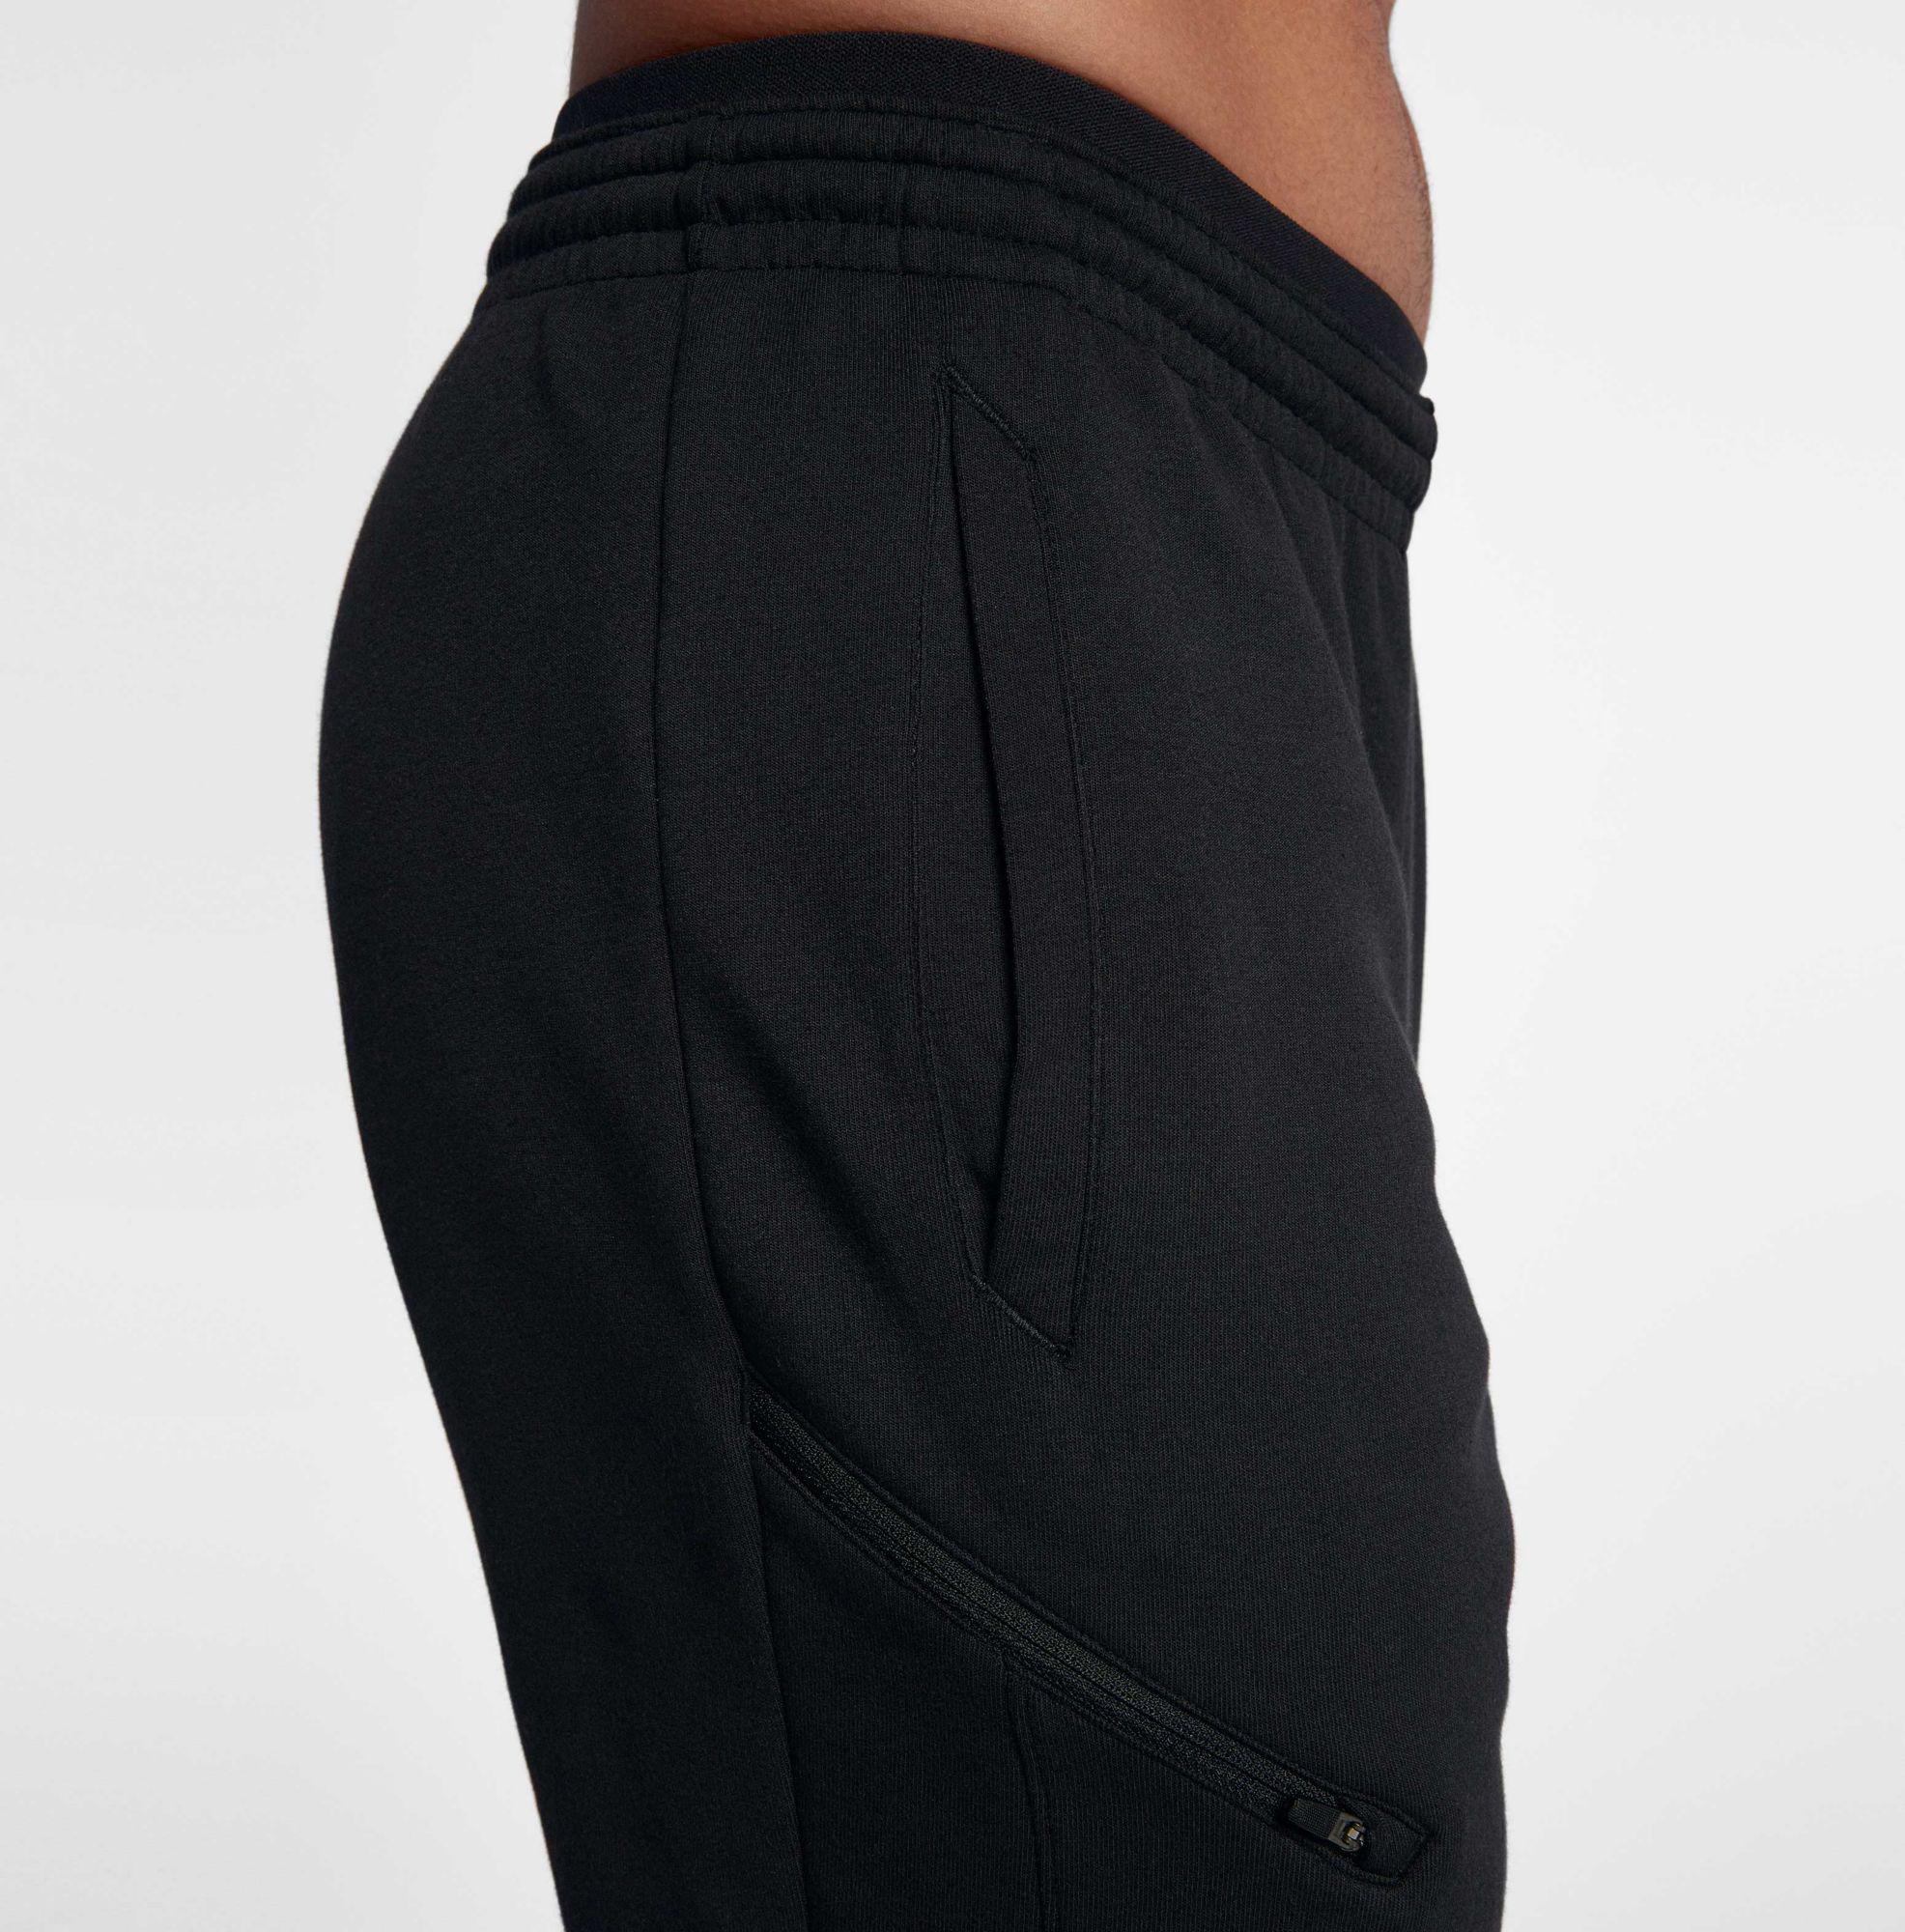 Nike Synthetic Dry Showtime Basketball Pants in Black for Men - Lyst